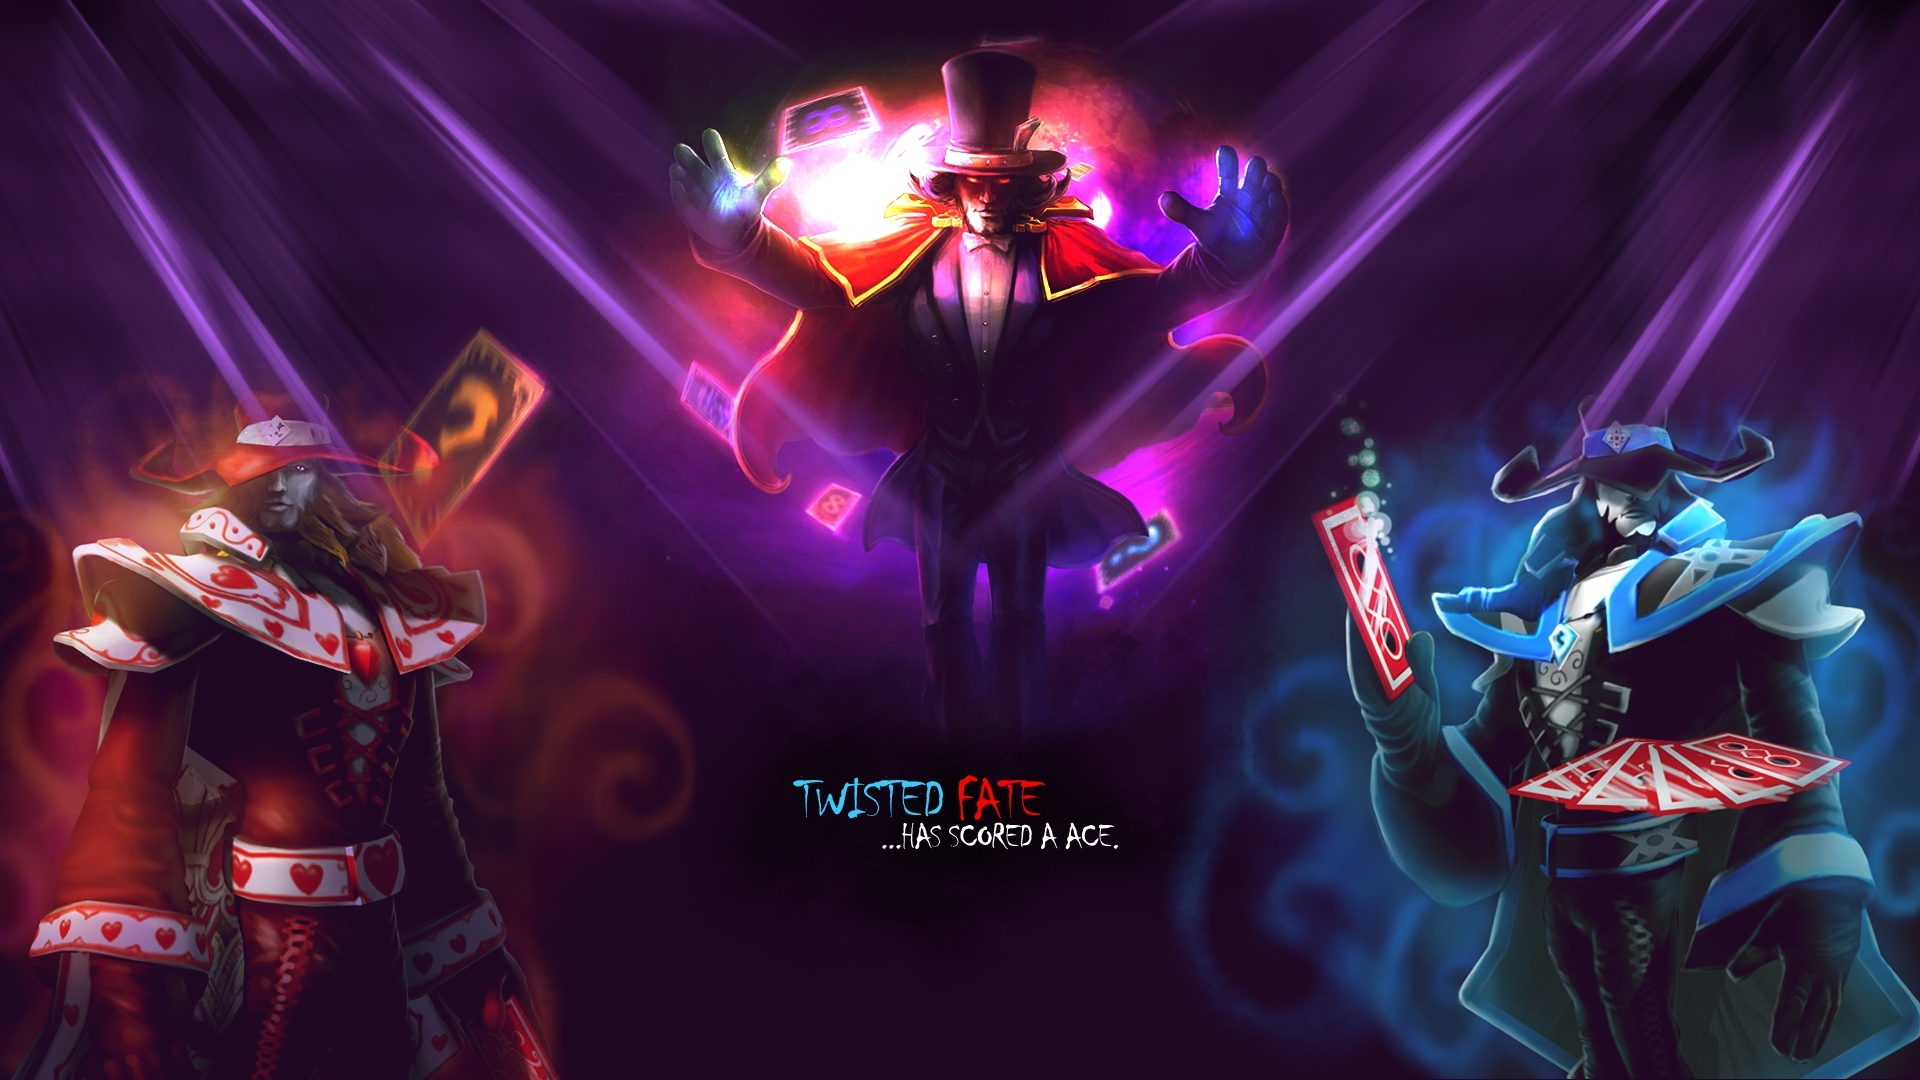  twisted fate 1920x1080 wallpaper Best WallpapersTop Wallpapers